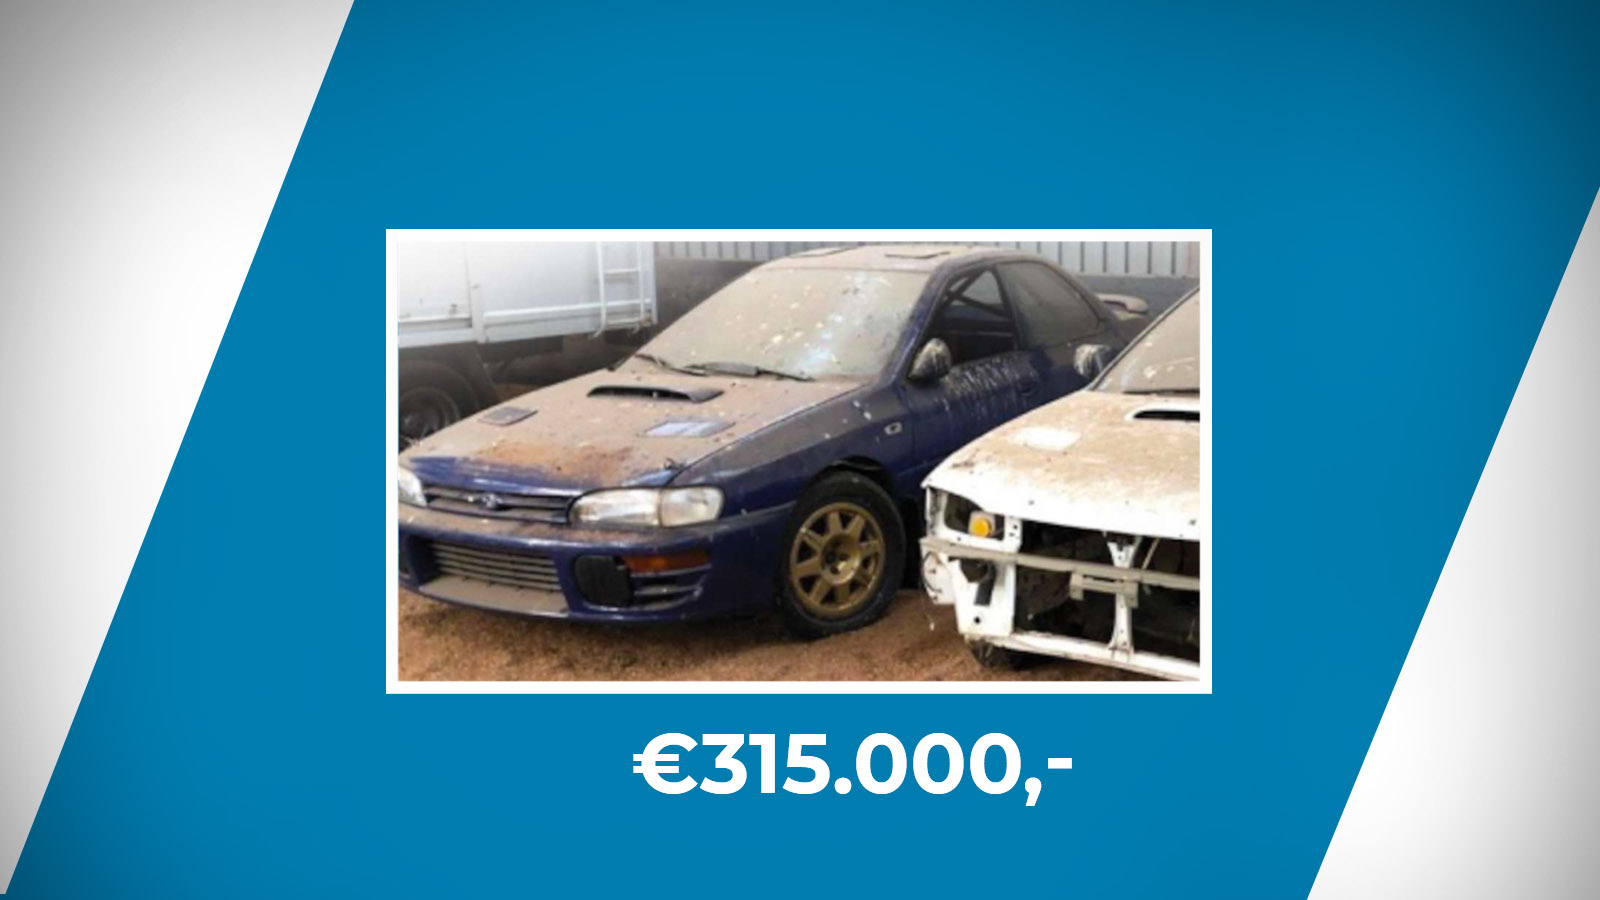 Barnfind turns out to be a Subaru Colin McRae and produces €300,000